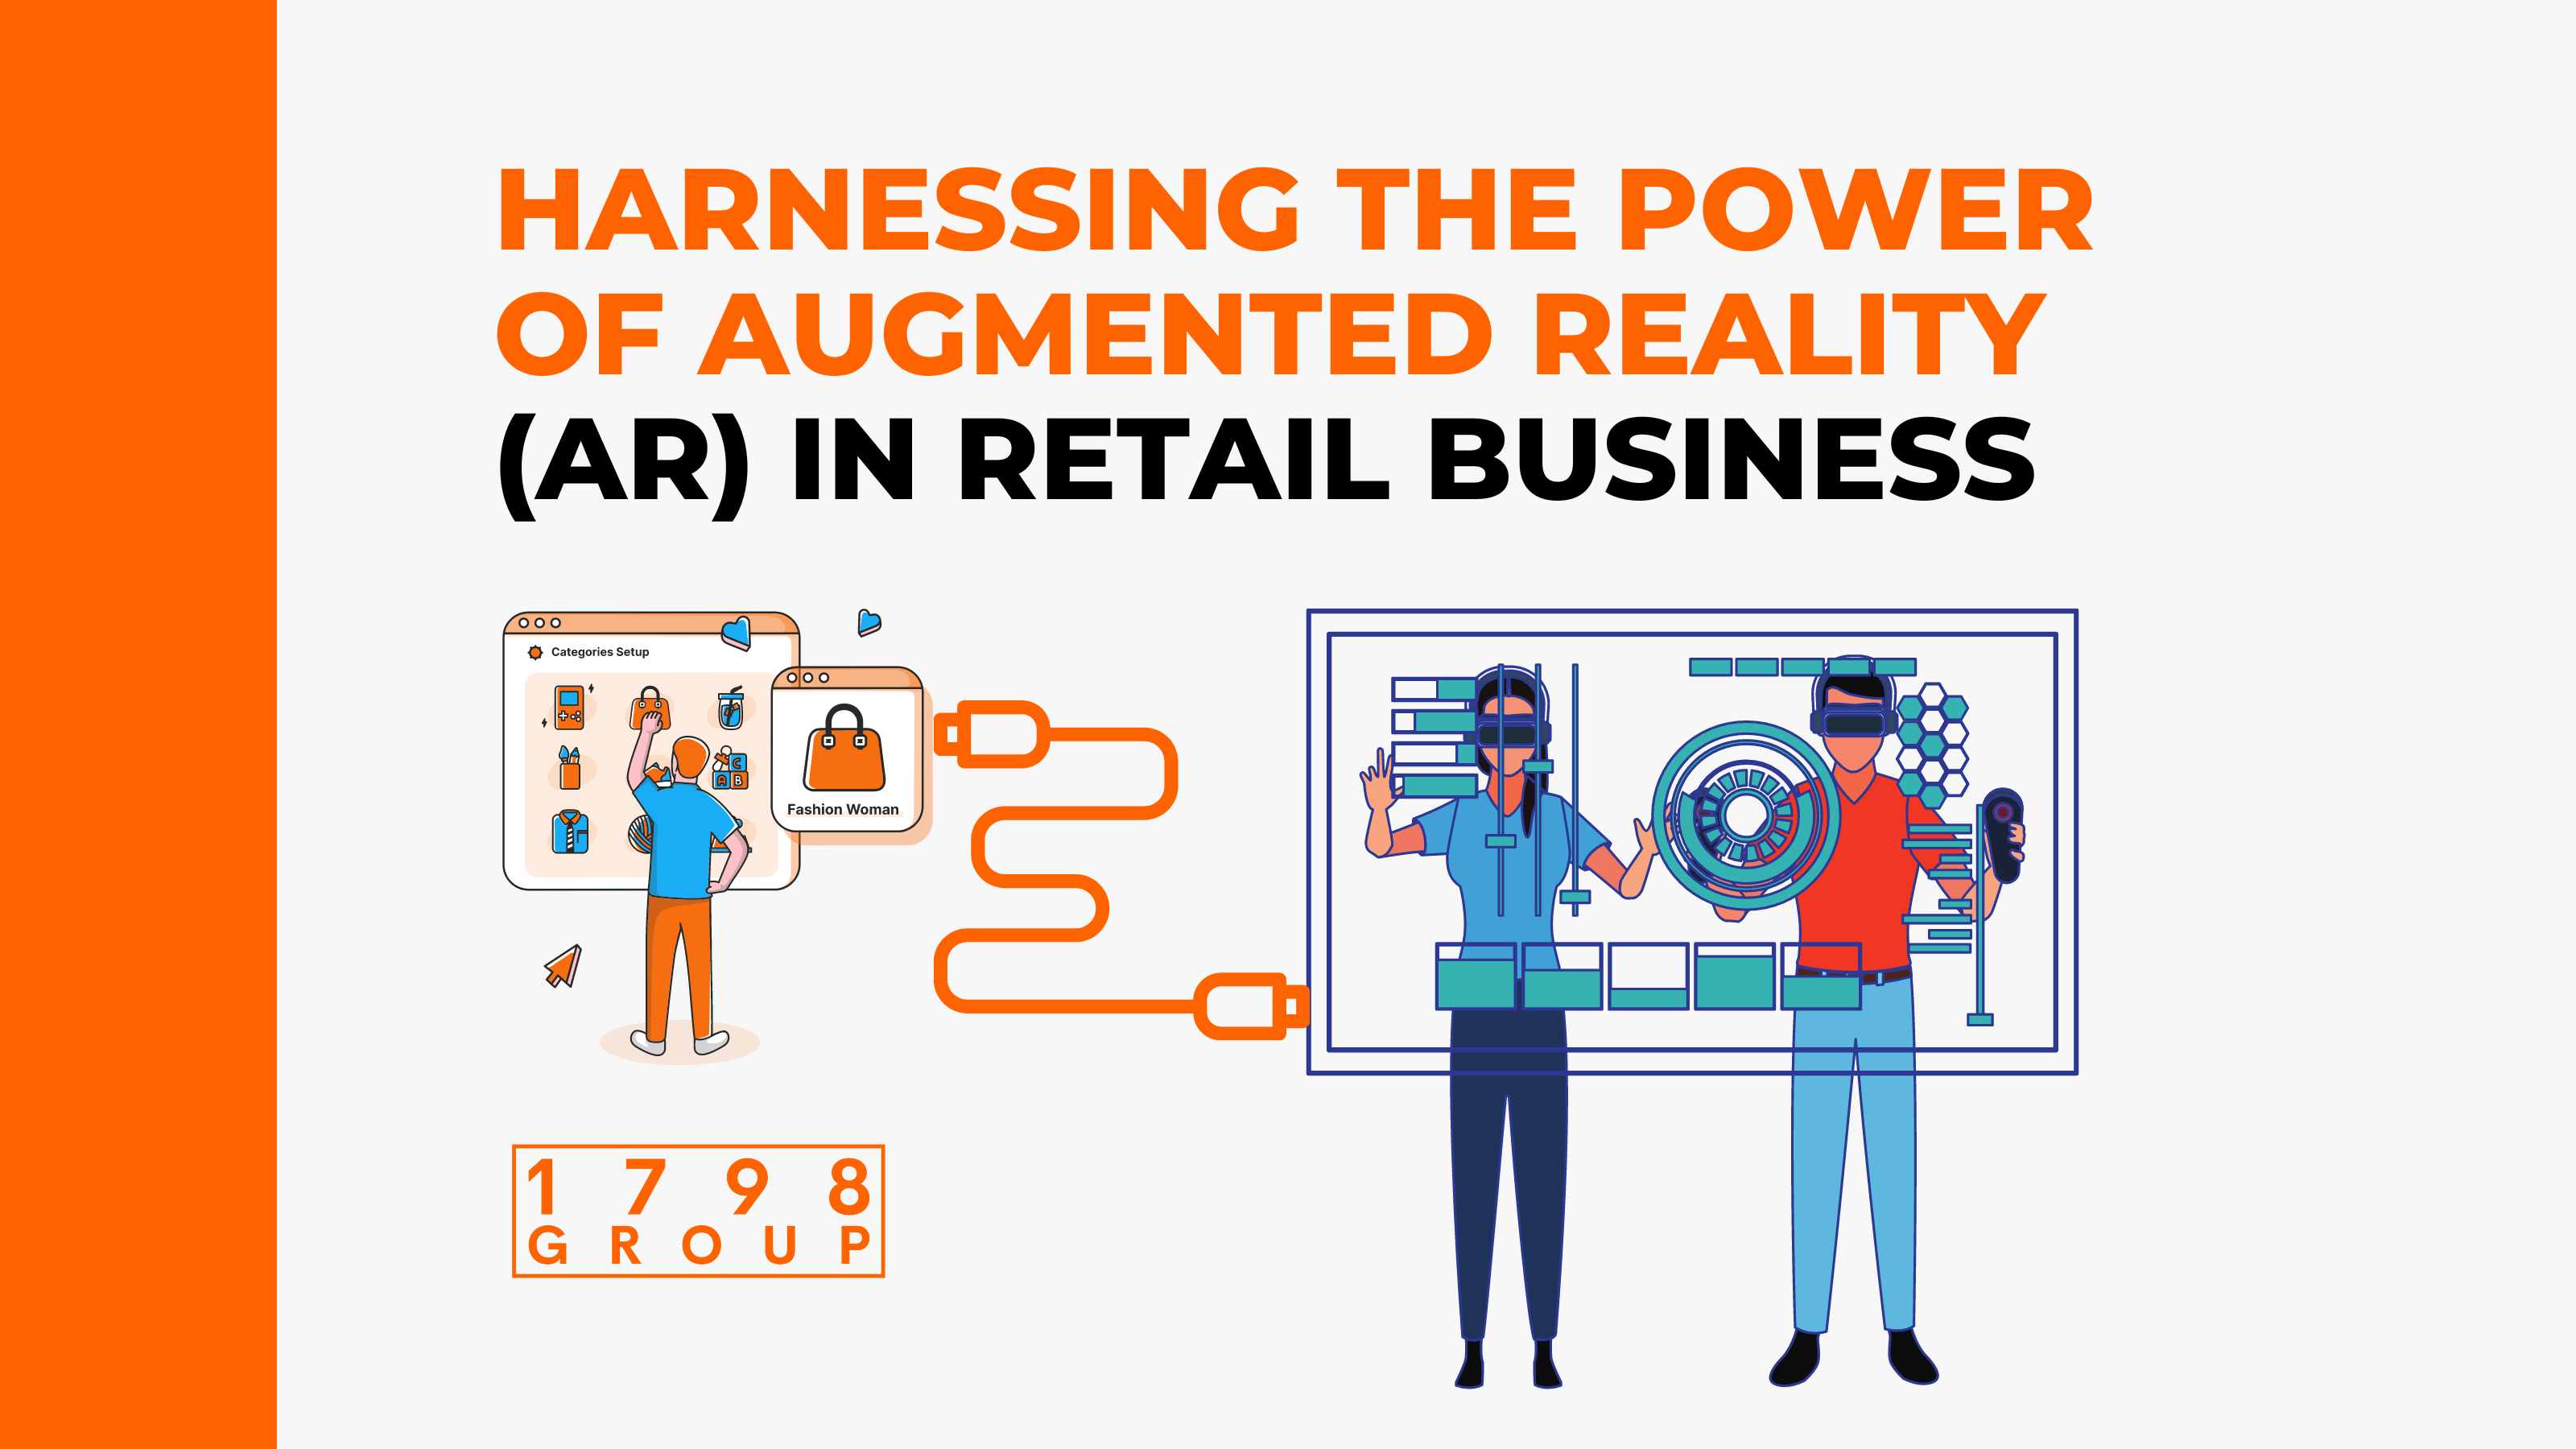 Harnessing the Power of Augmented Reality (AR) in Retail Business